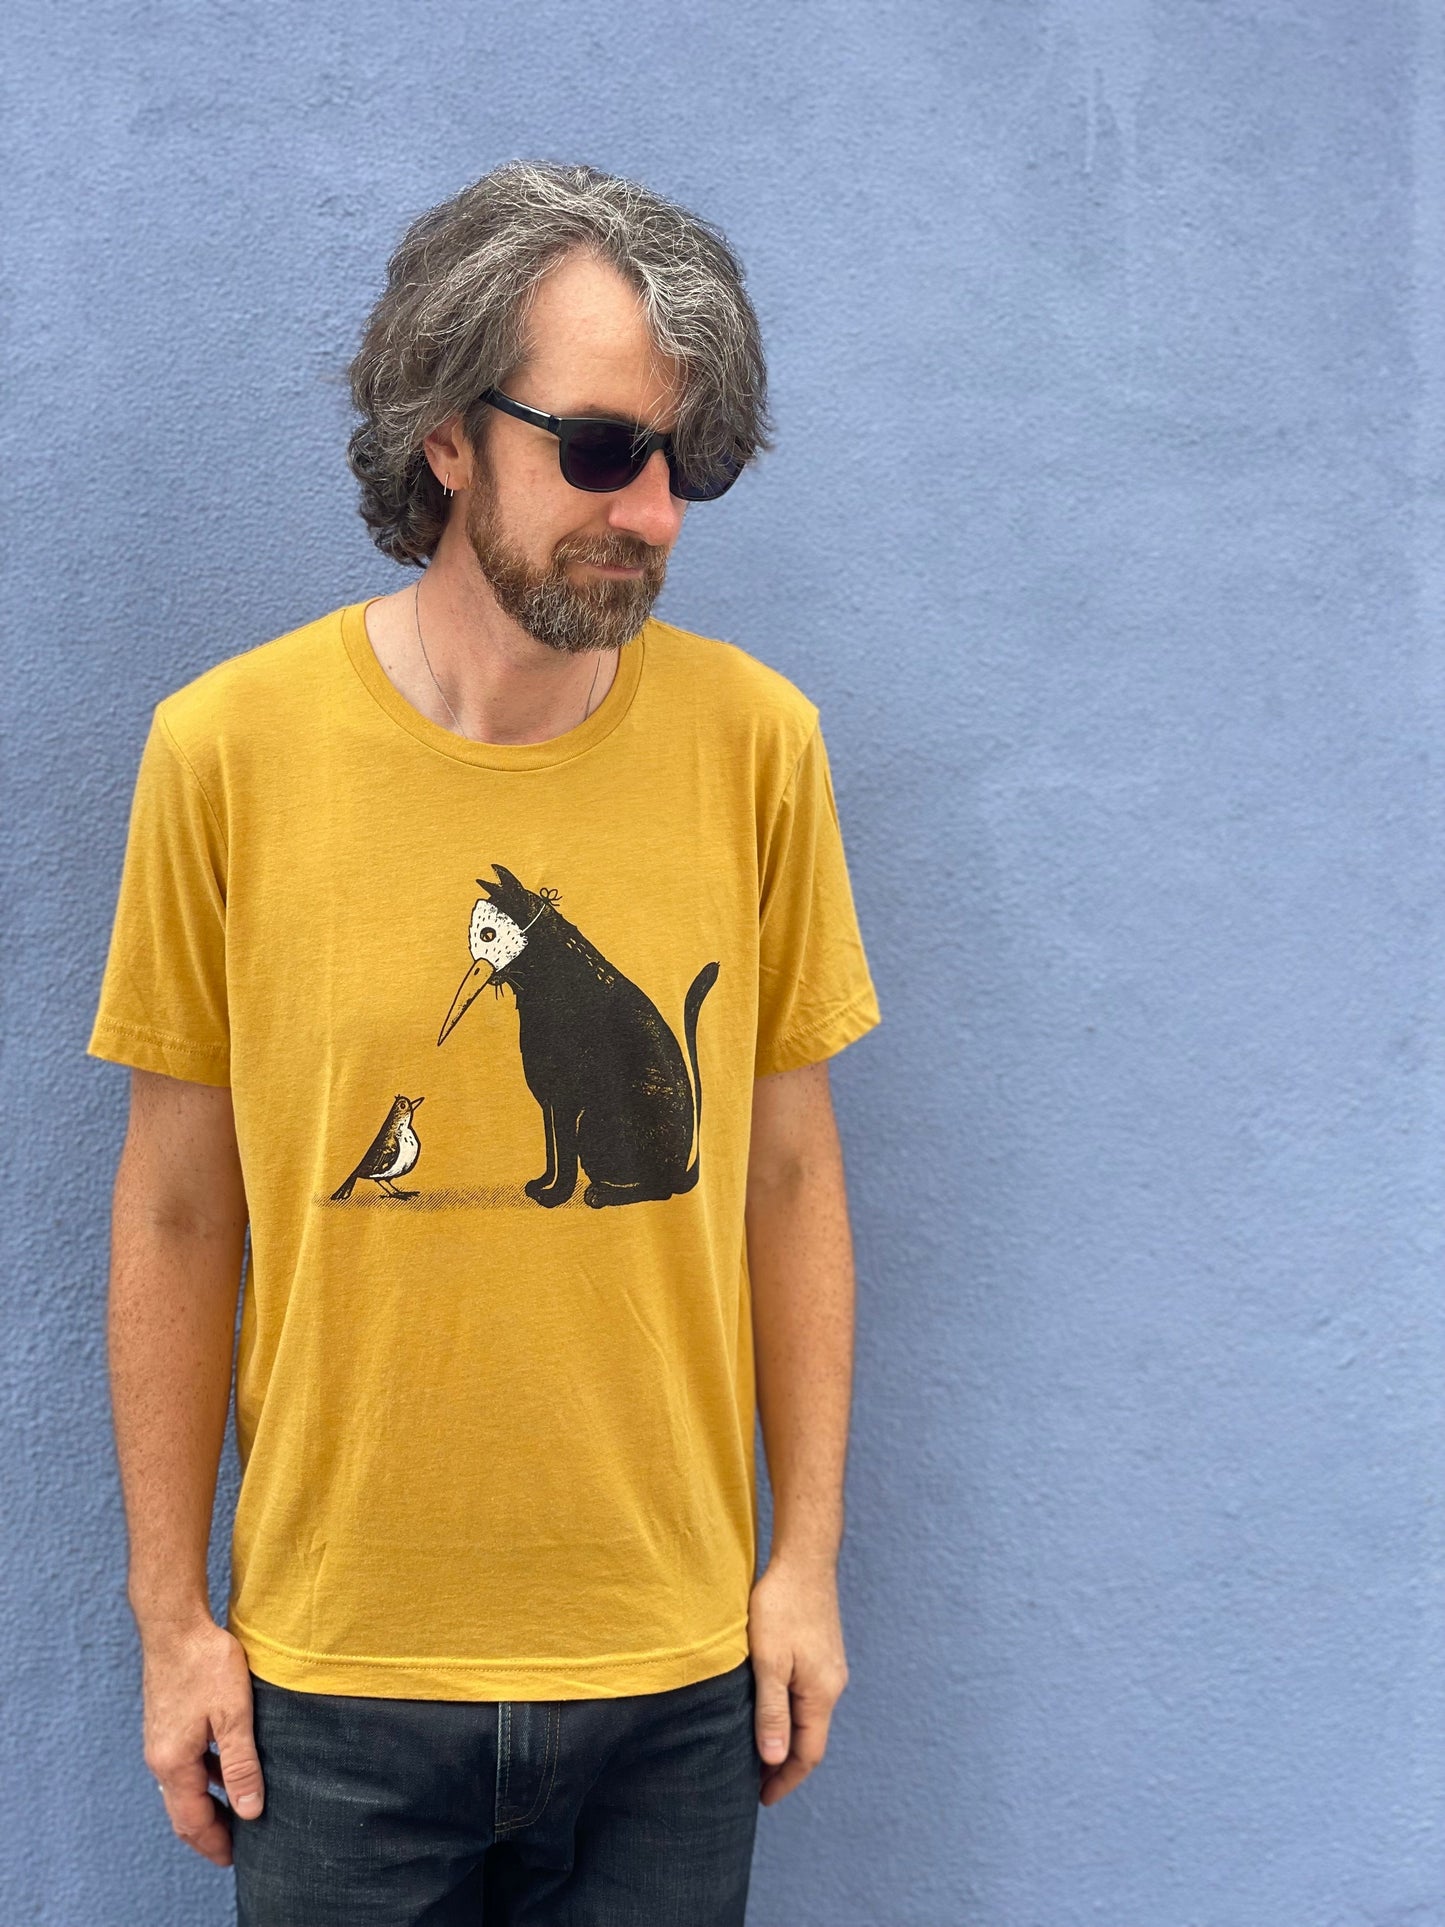 The Masked Cat Tee